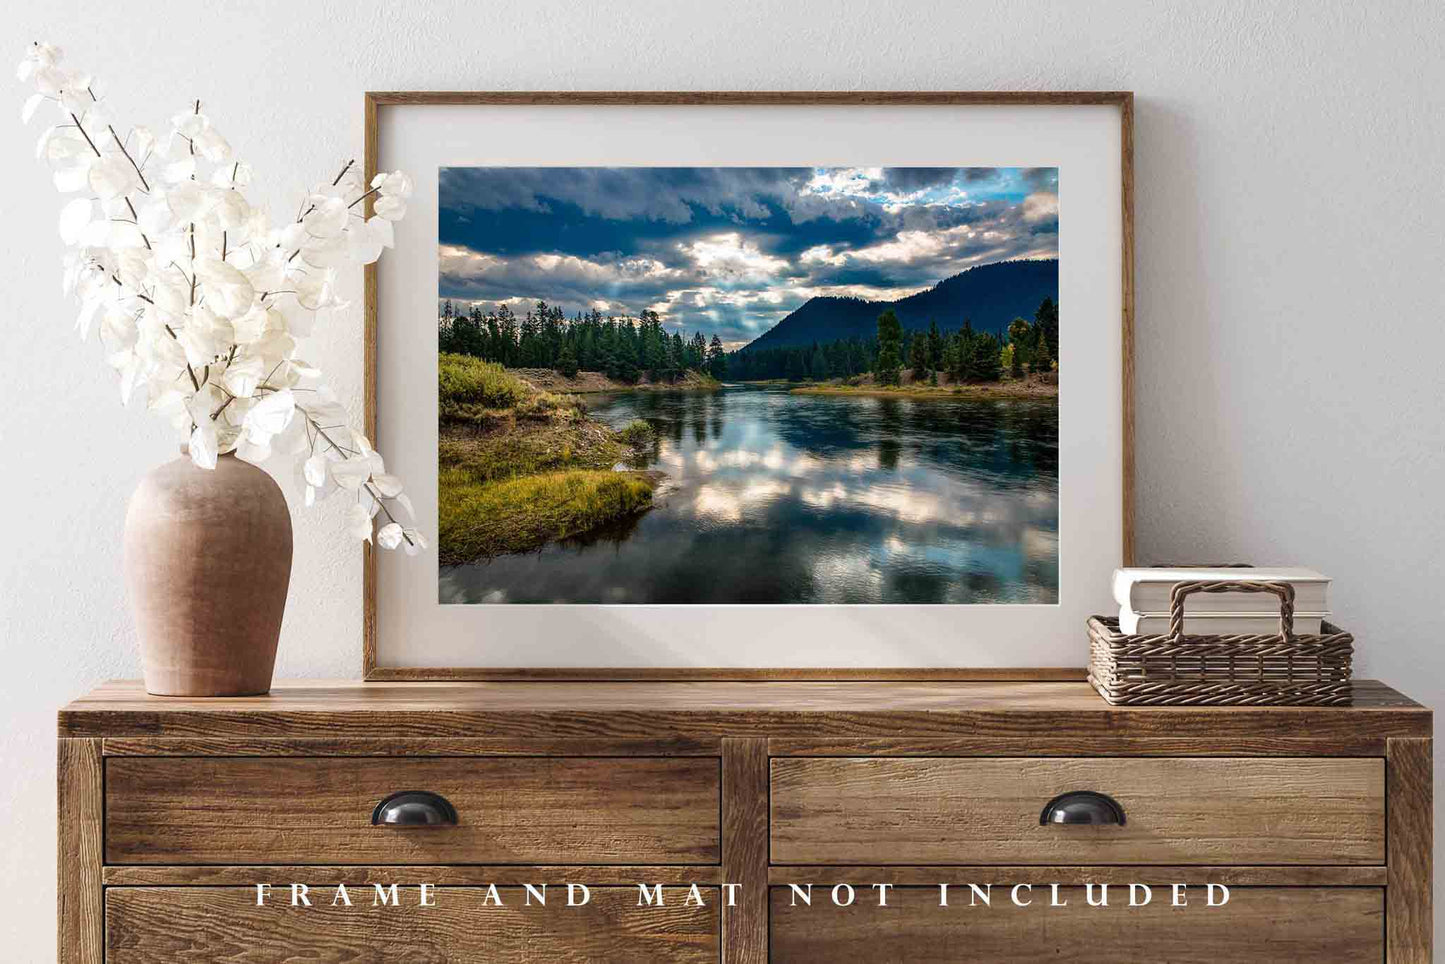 Grand Teton National Park Photo Print | Snake River Picture | Wyoming Wall Art | Landscape Photography | Rocky Mountain Decor